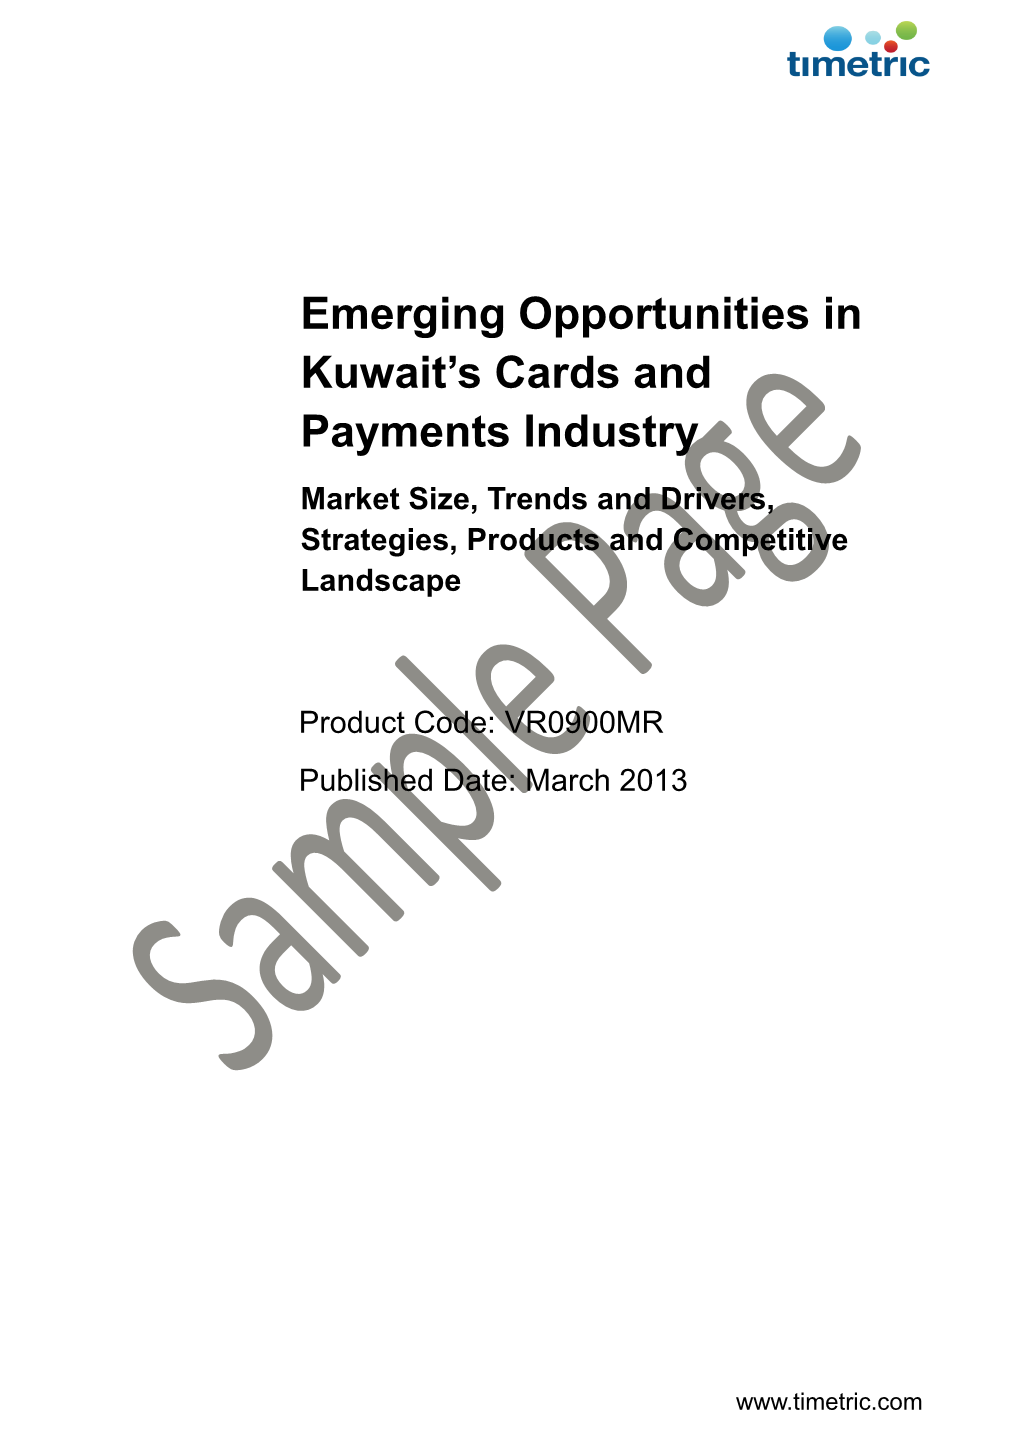 Emerging Opportunities in Kuwait's Cards and Payments Industry